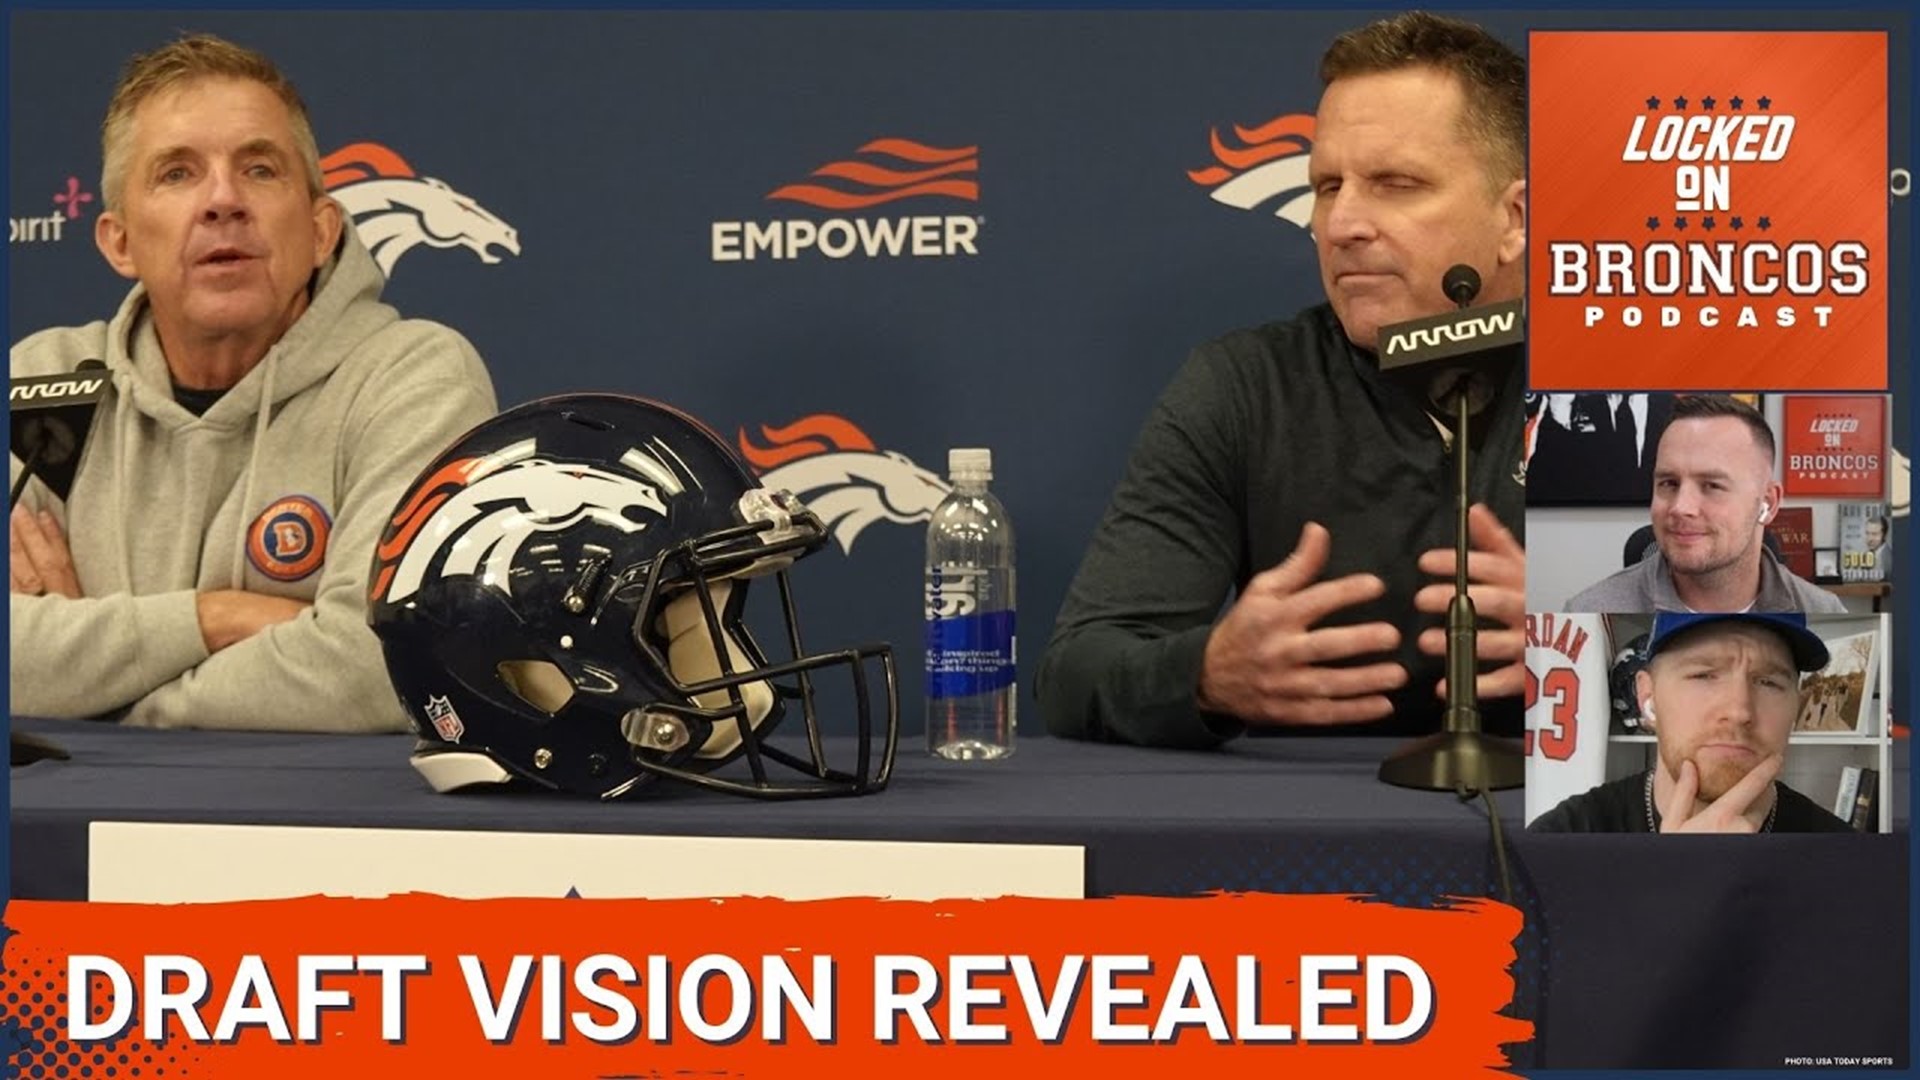 The Denver Broncos held their pre NFL Draft press conference on Thursday with George Paton and Sean Payton